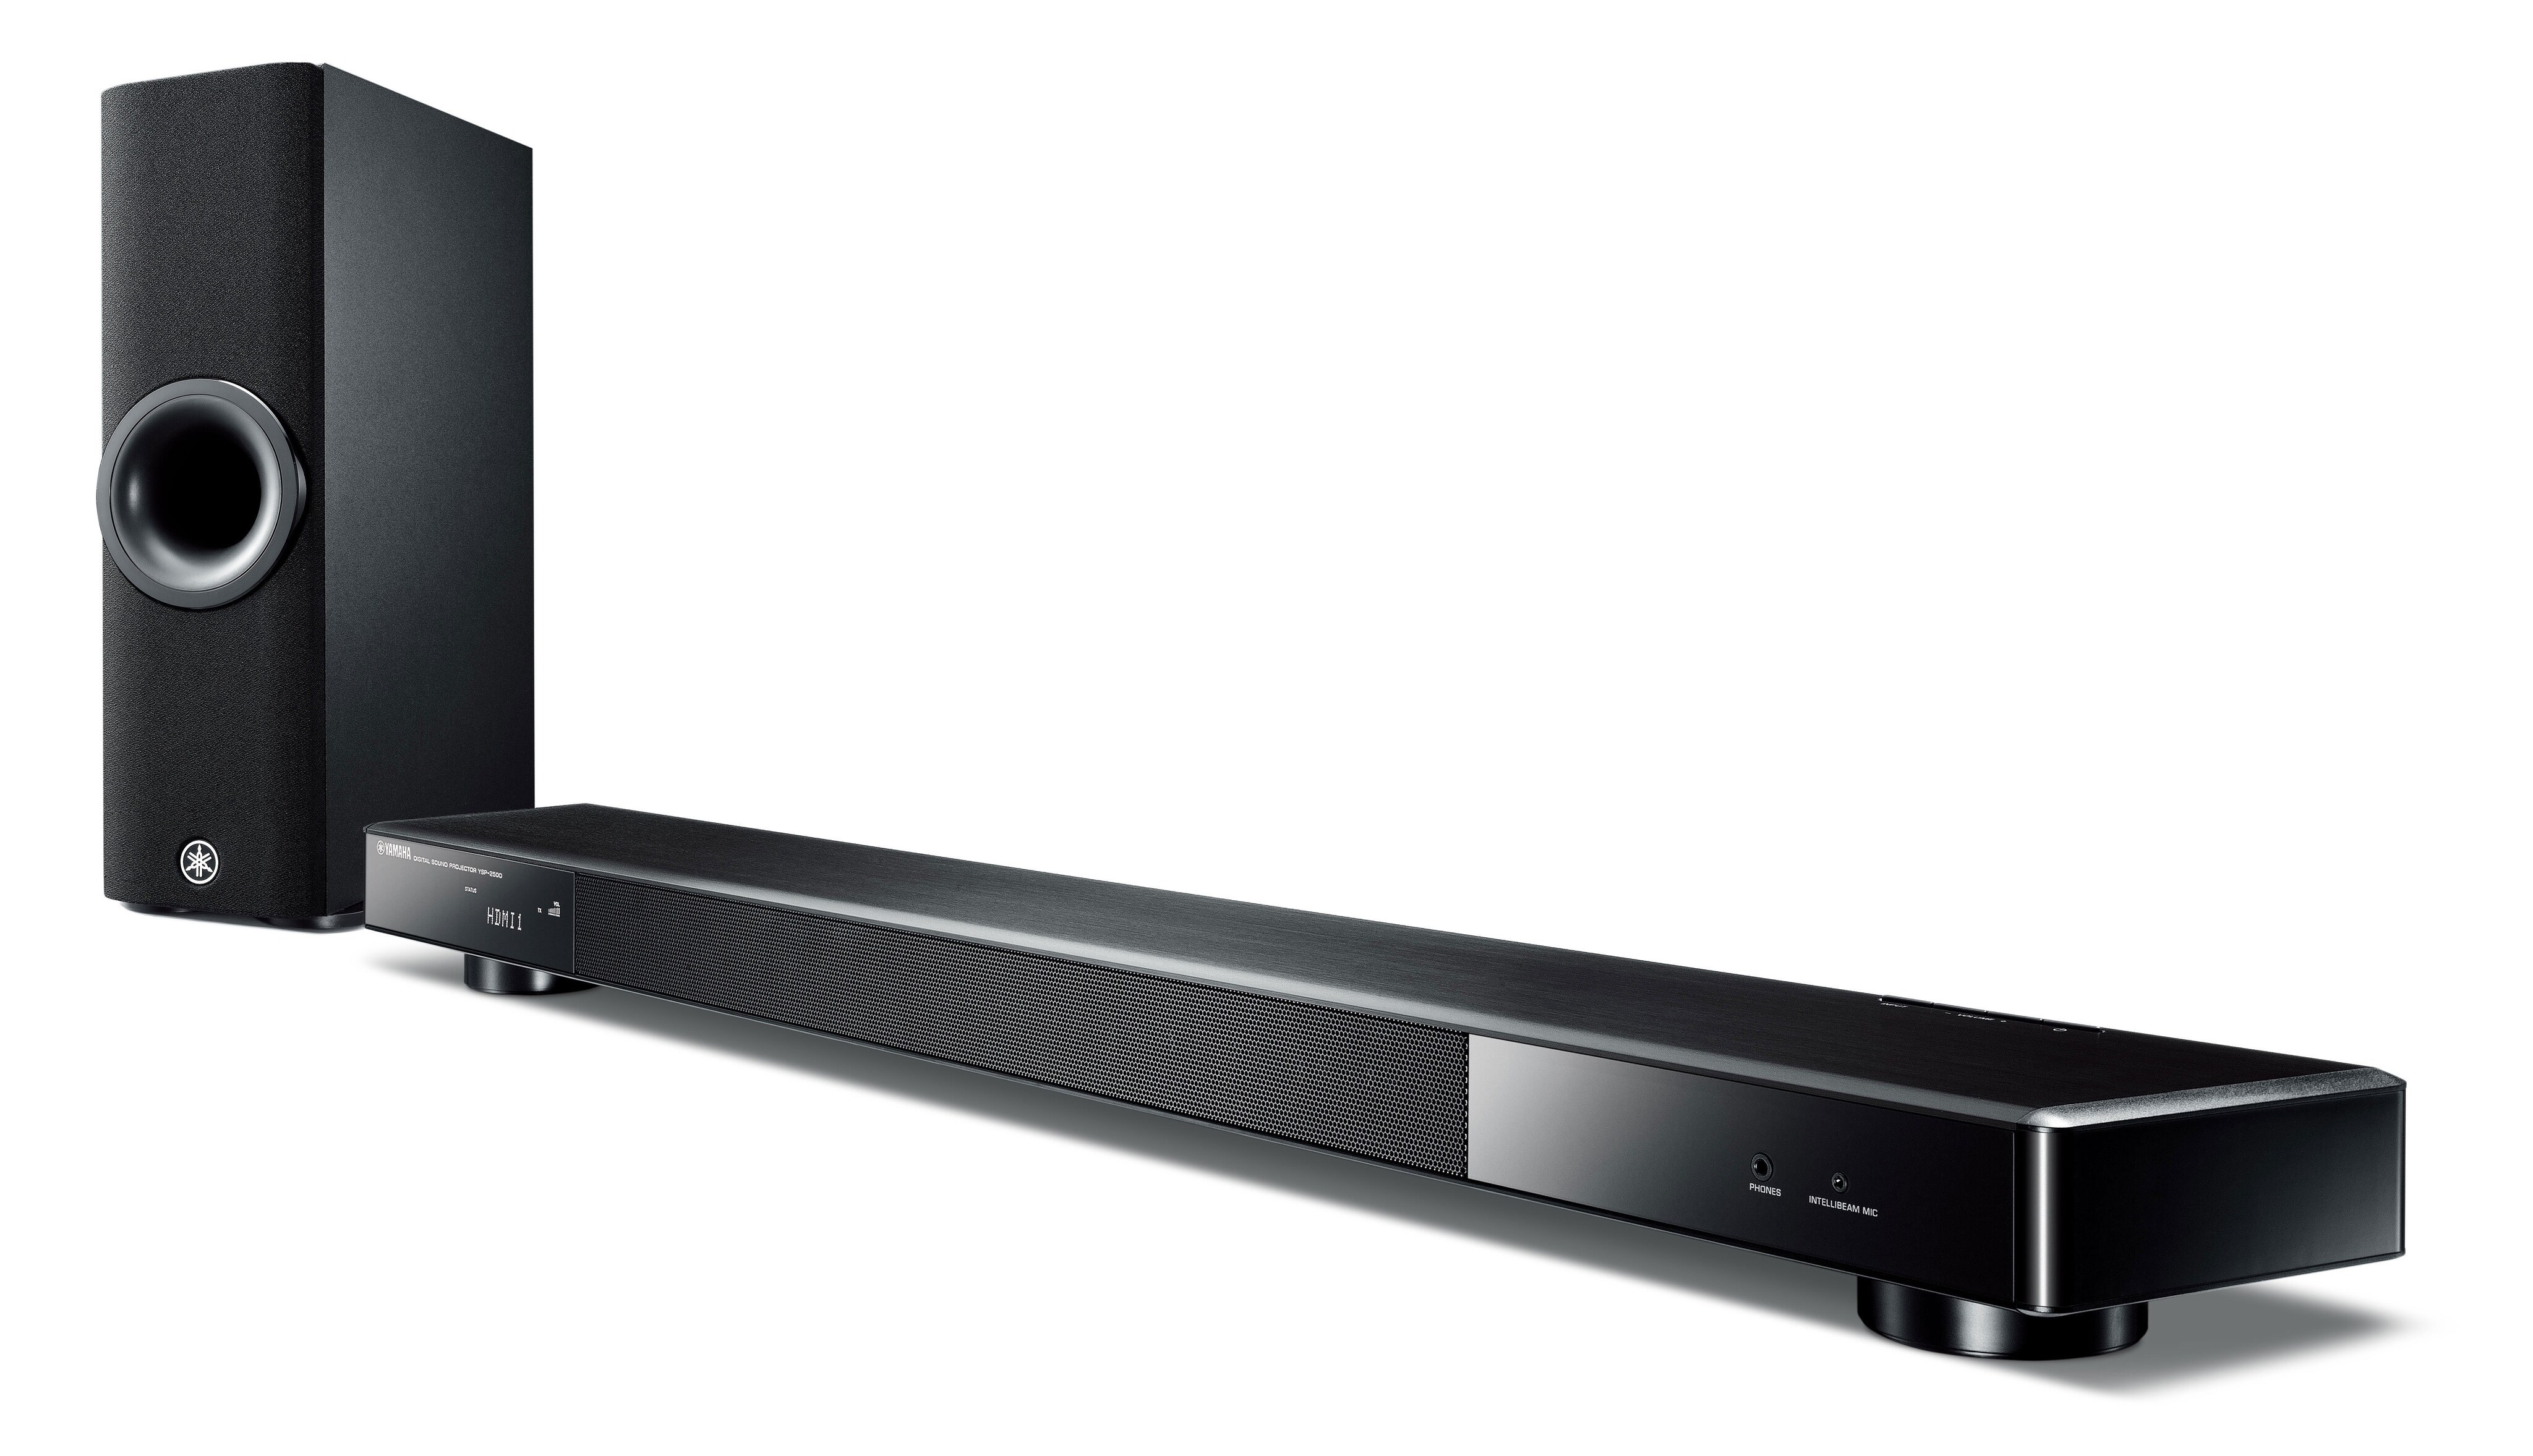 YSP-2500 - Overview - Sound Bar - Audio & Visual - Products ...